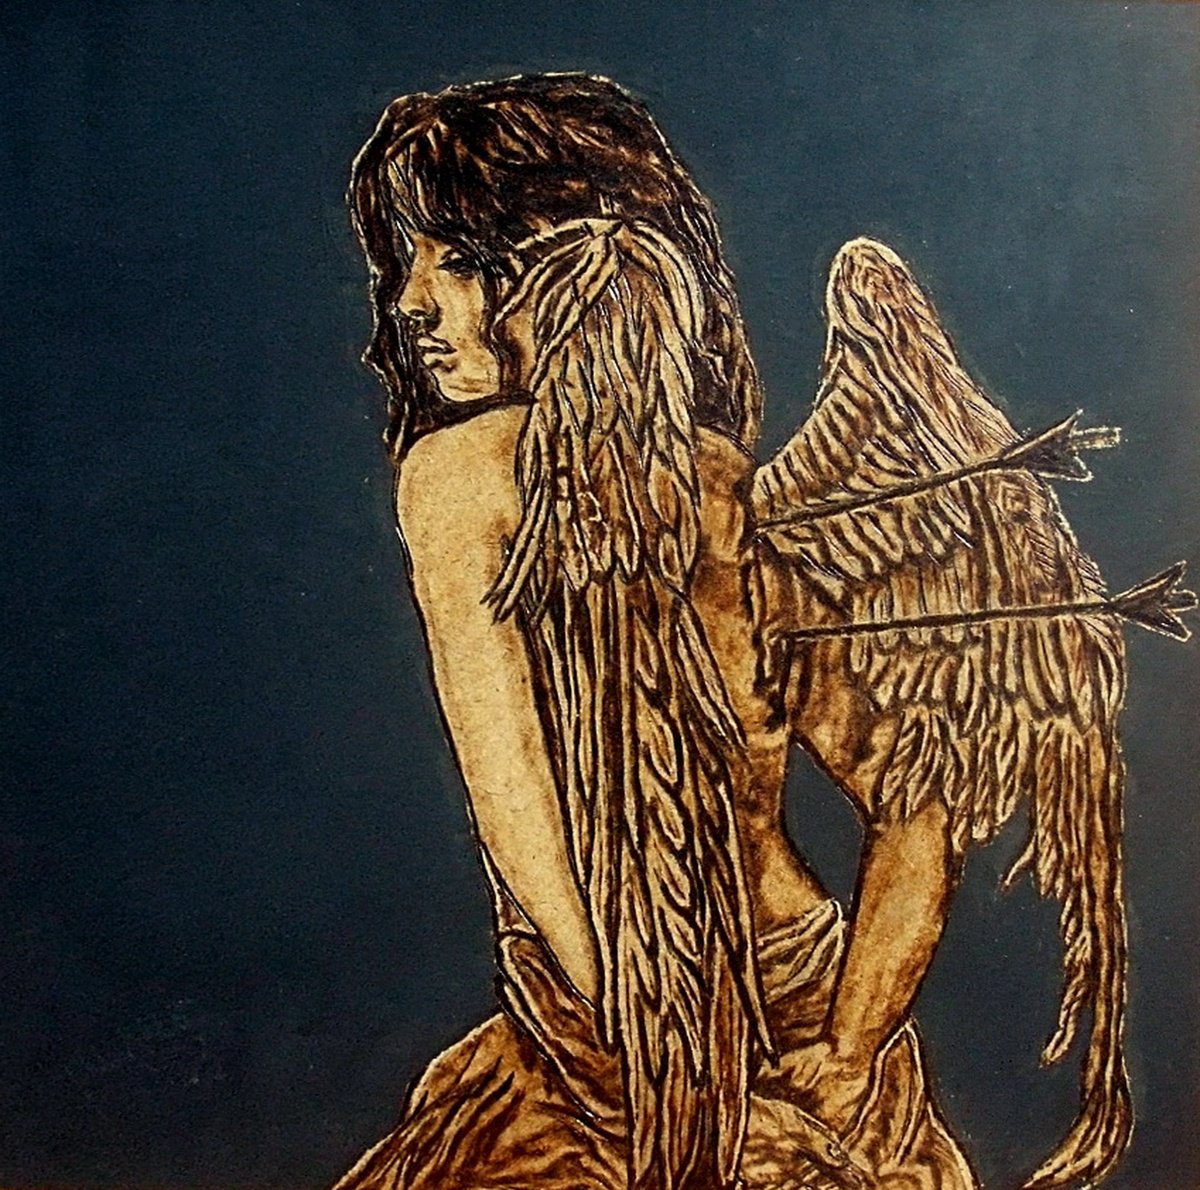 Back to Earth by MILIS Pyrography